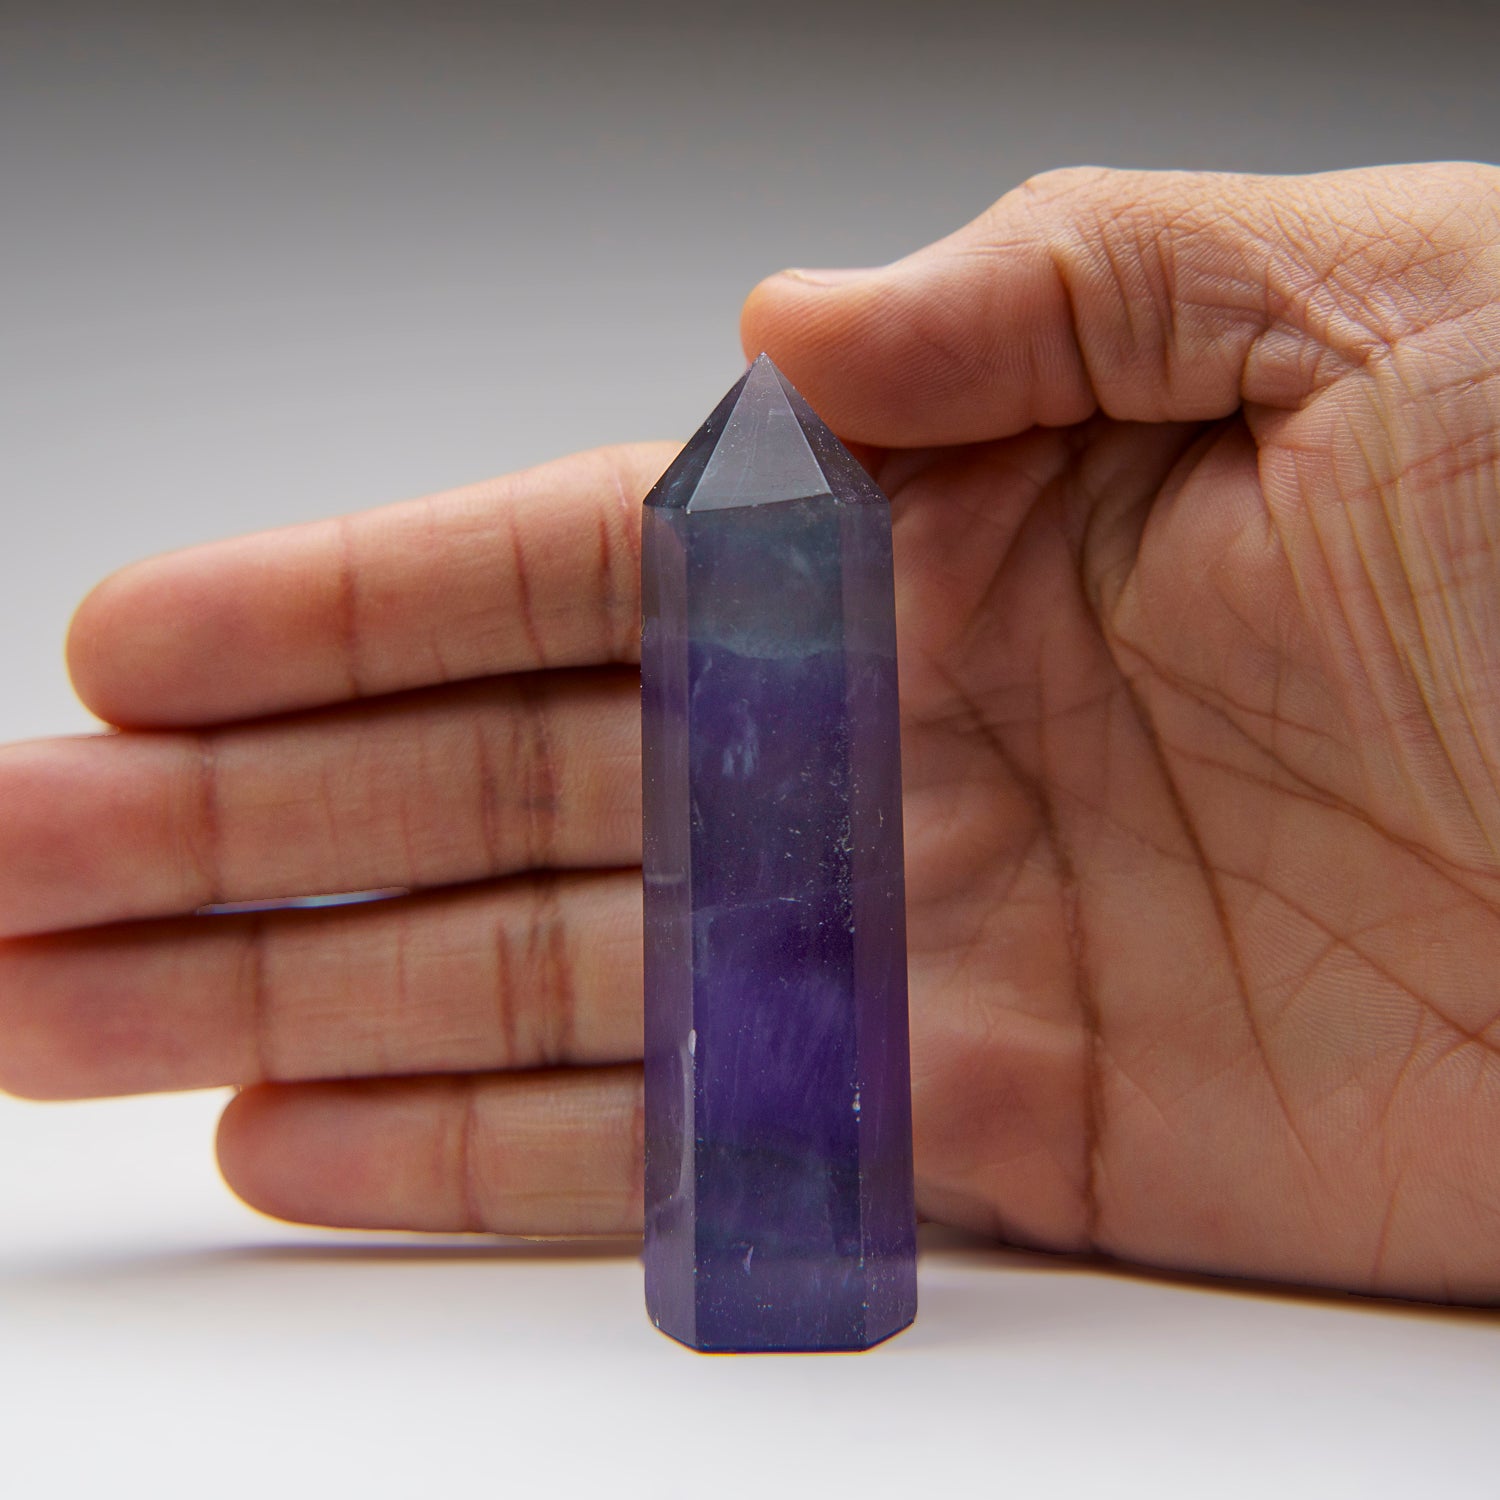 Genuine Polished Purple Fluorite Point from China (91 grams)